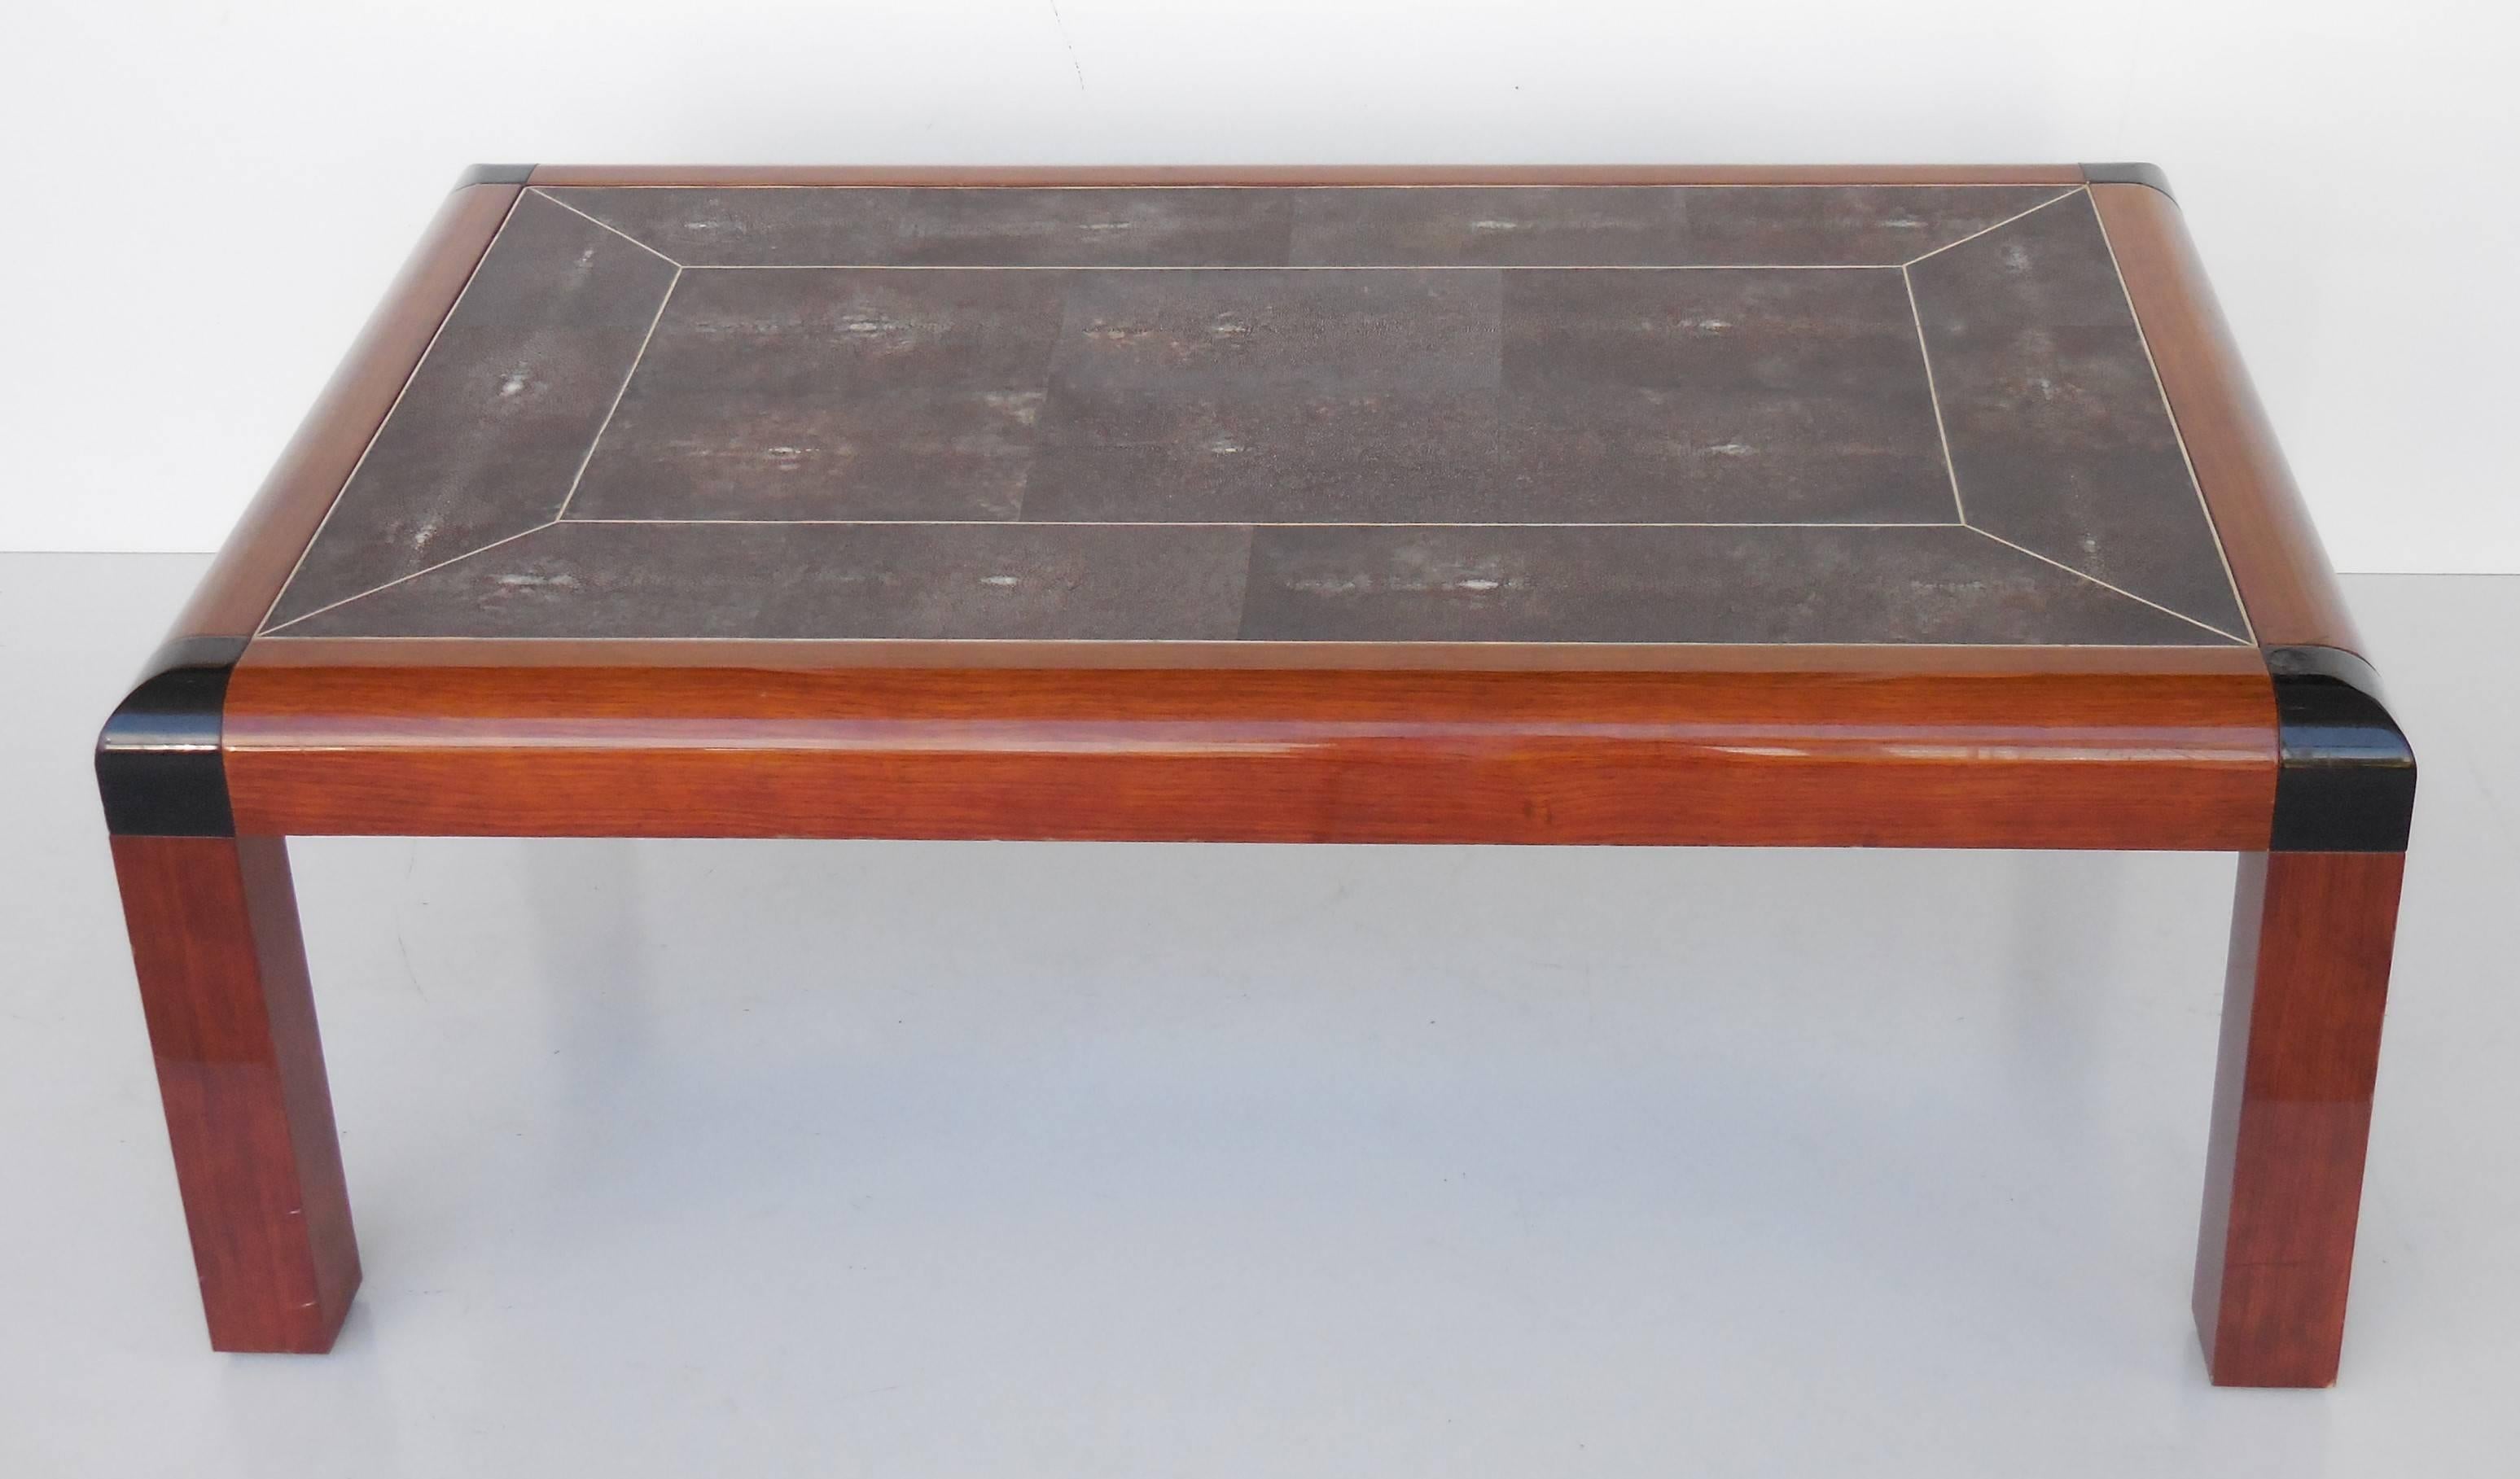 A rare coffee table by Karl Springer. Beautiful shagreen top with a thick solid wood frame, corners are lacquered. Signed and dated underneath.